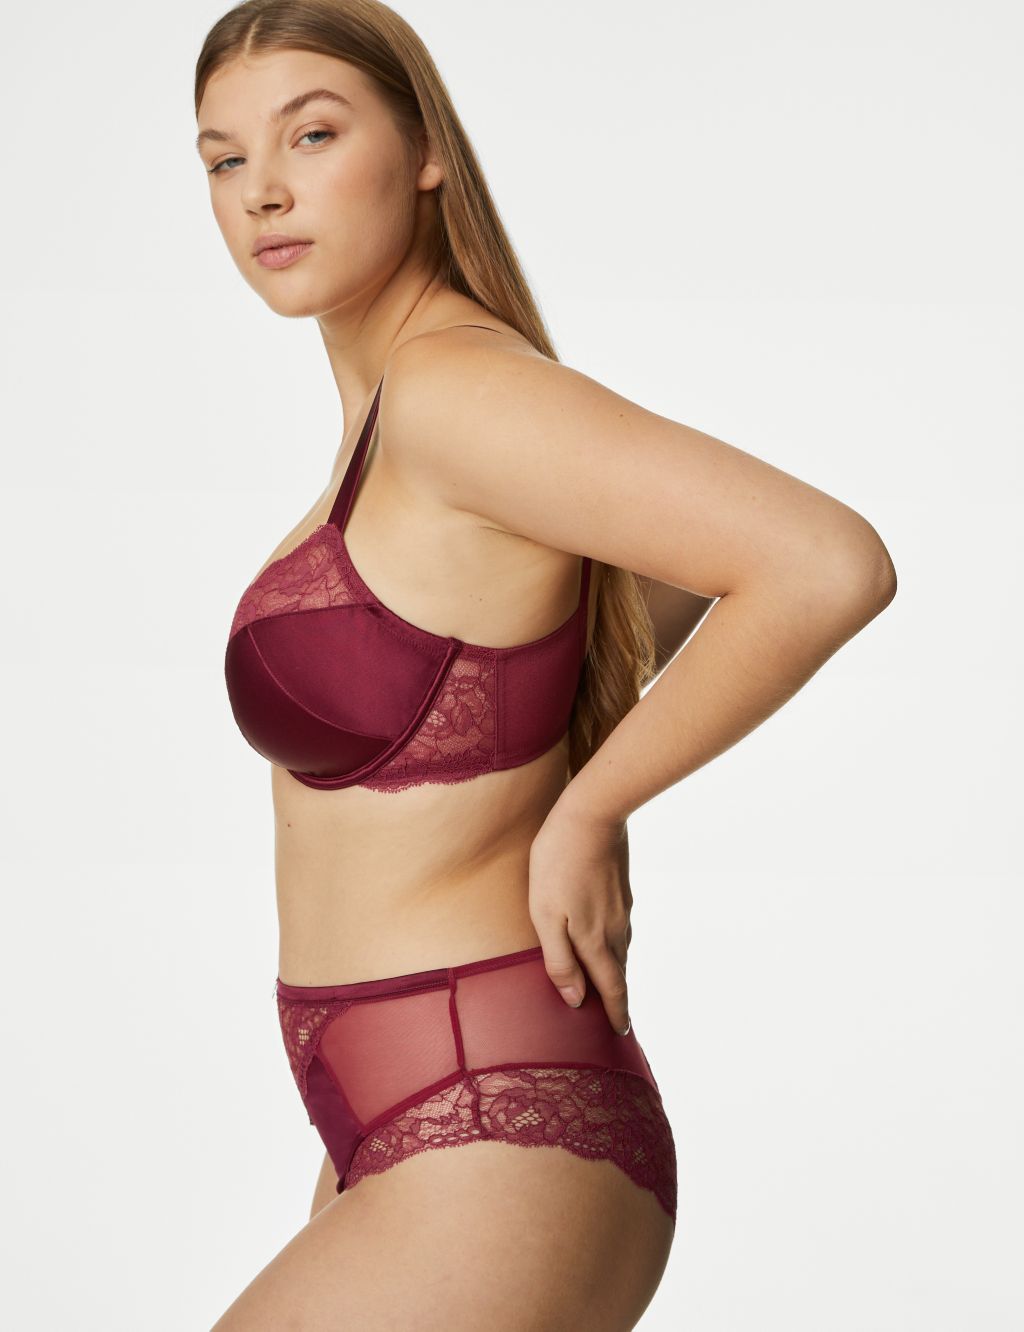 Claret Silk & Lace Wired Full Cup Bra F-H image 5